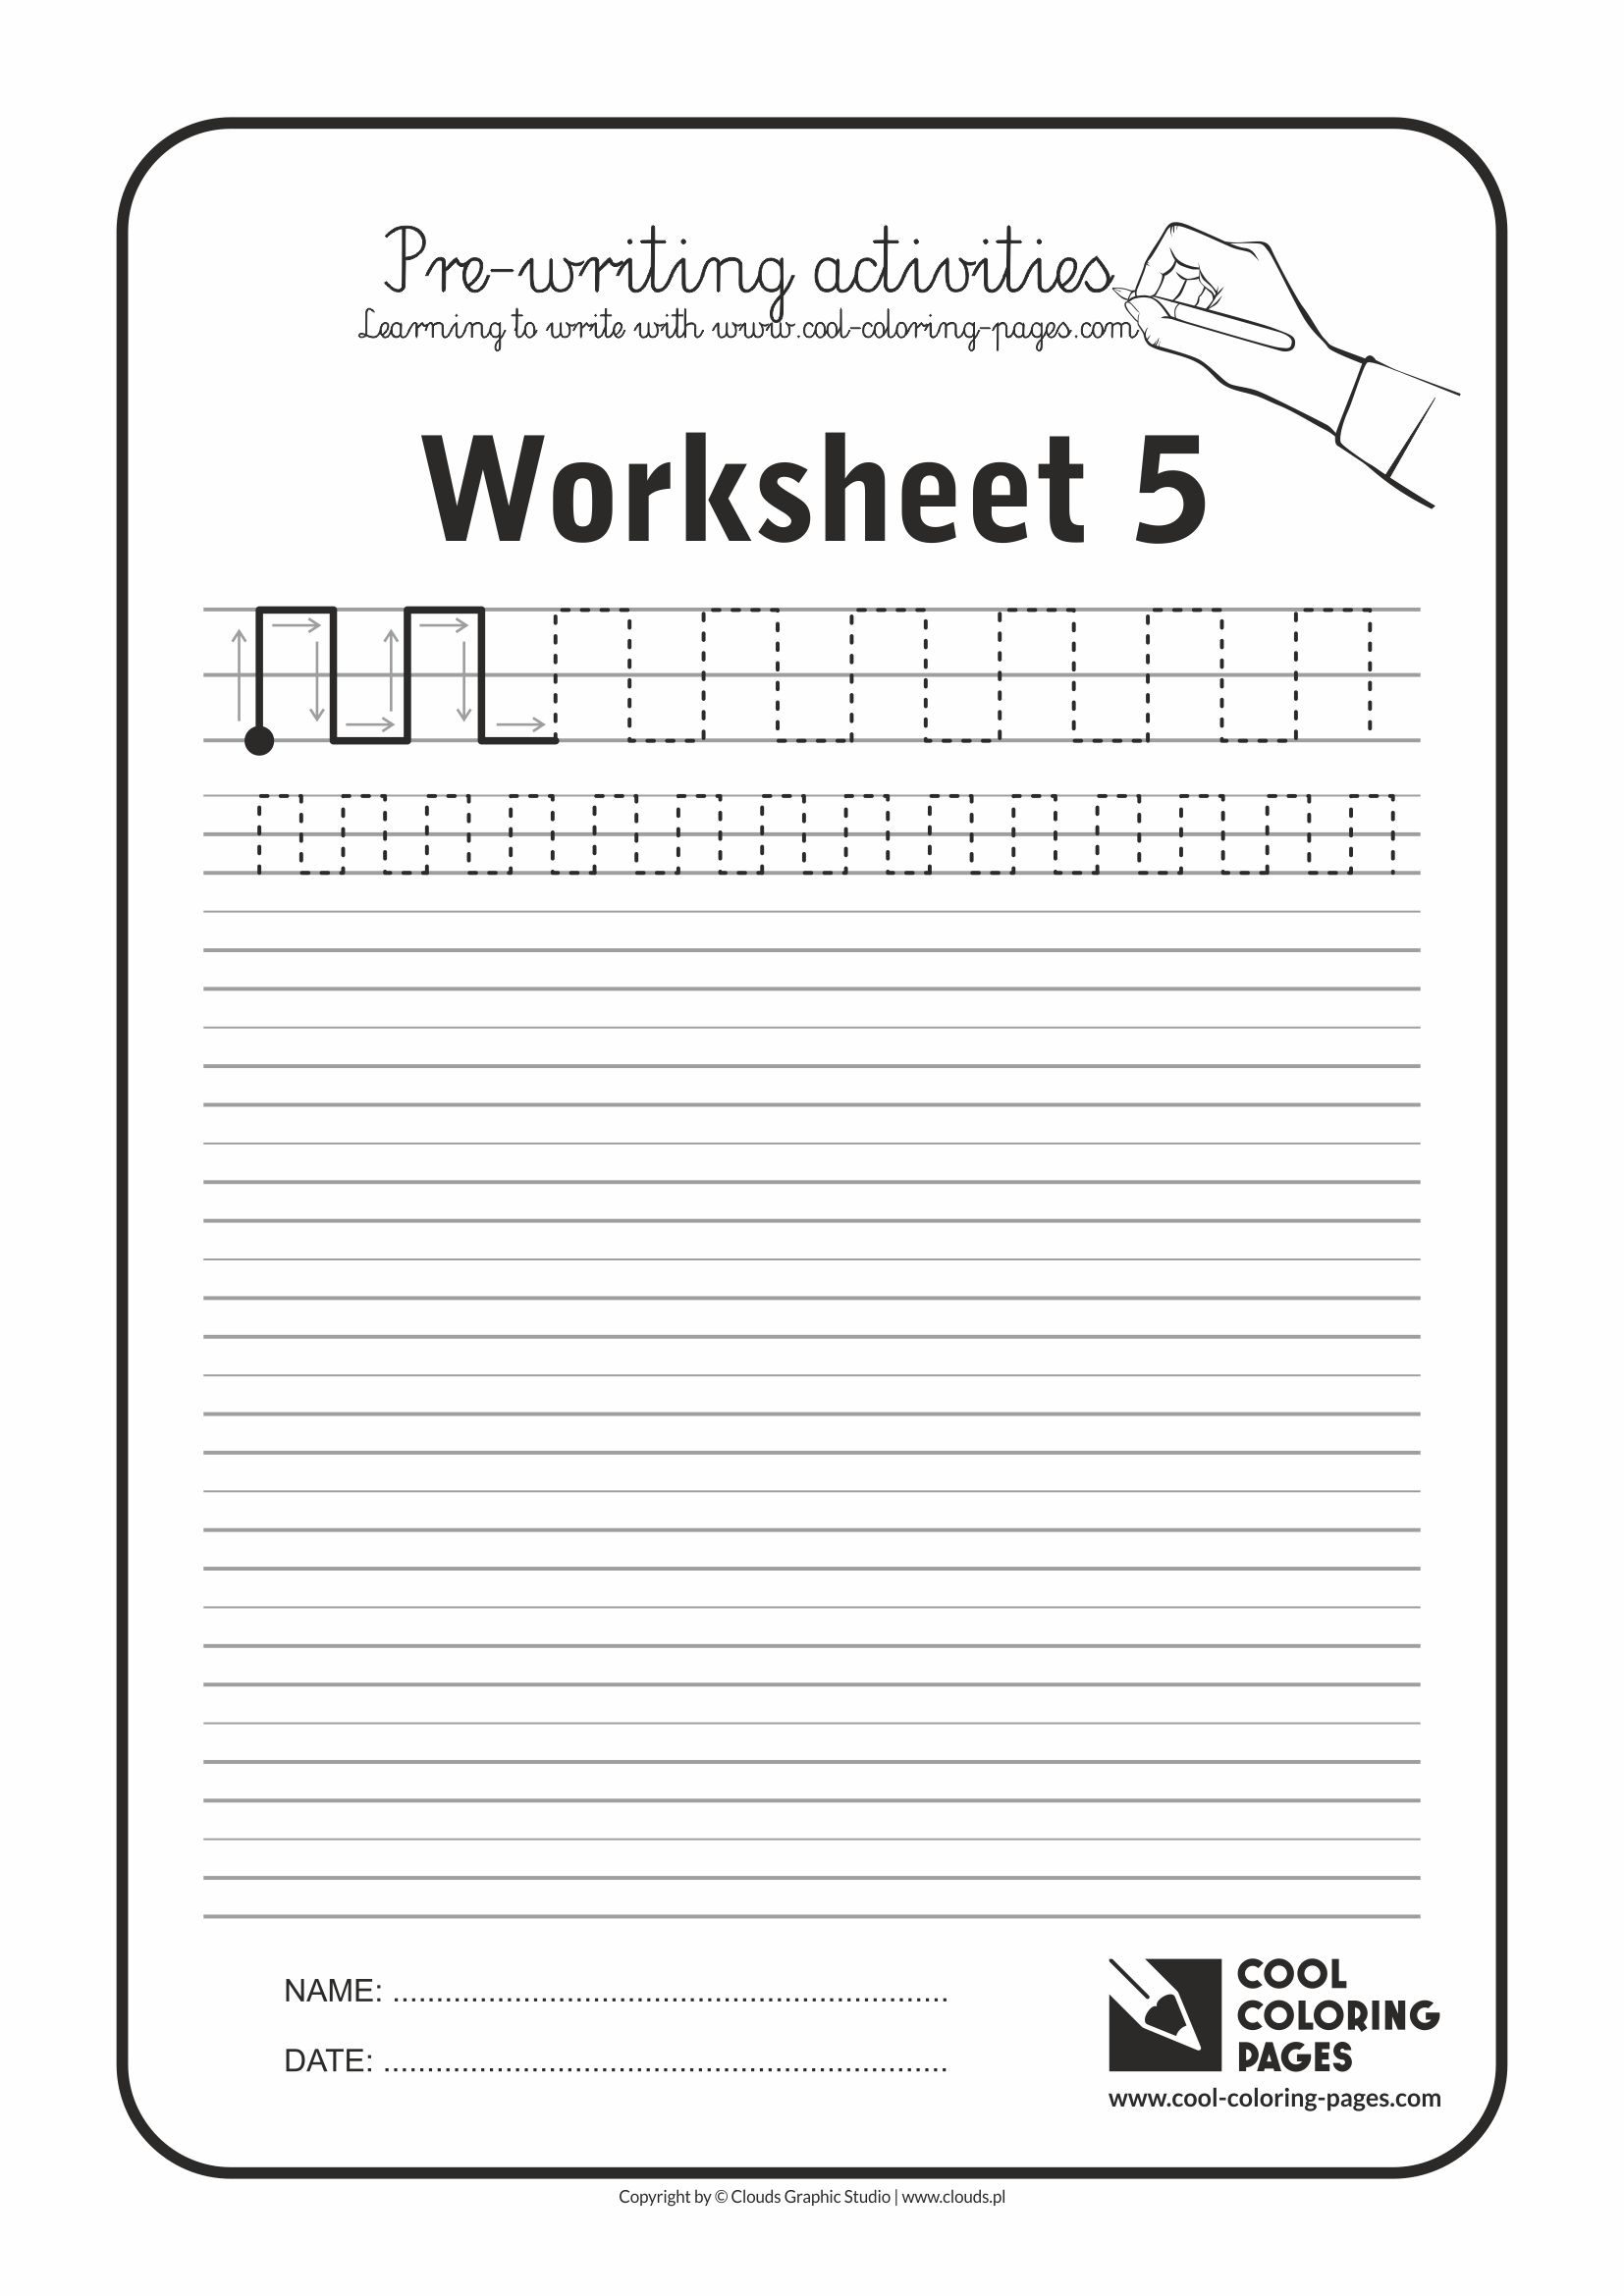 Cool Coloring Pages / Pre-writing activities / Worksheet no.5